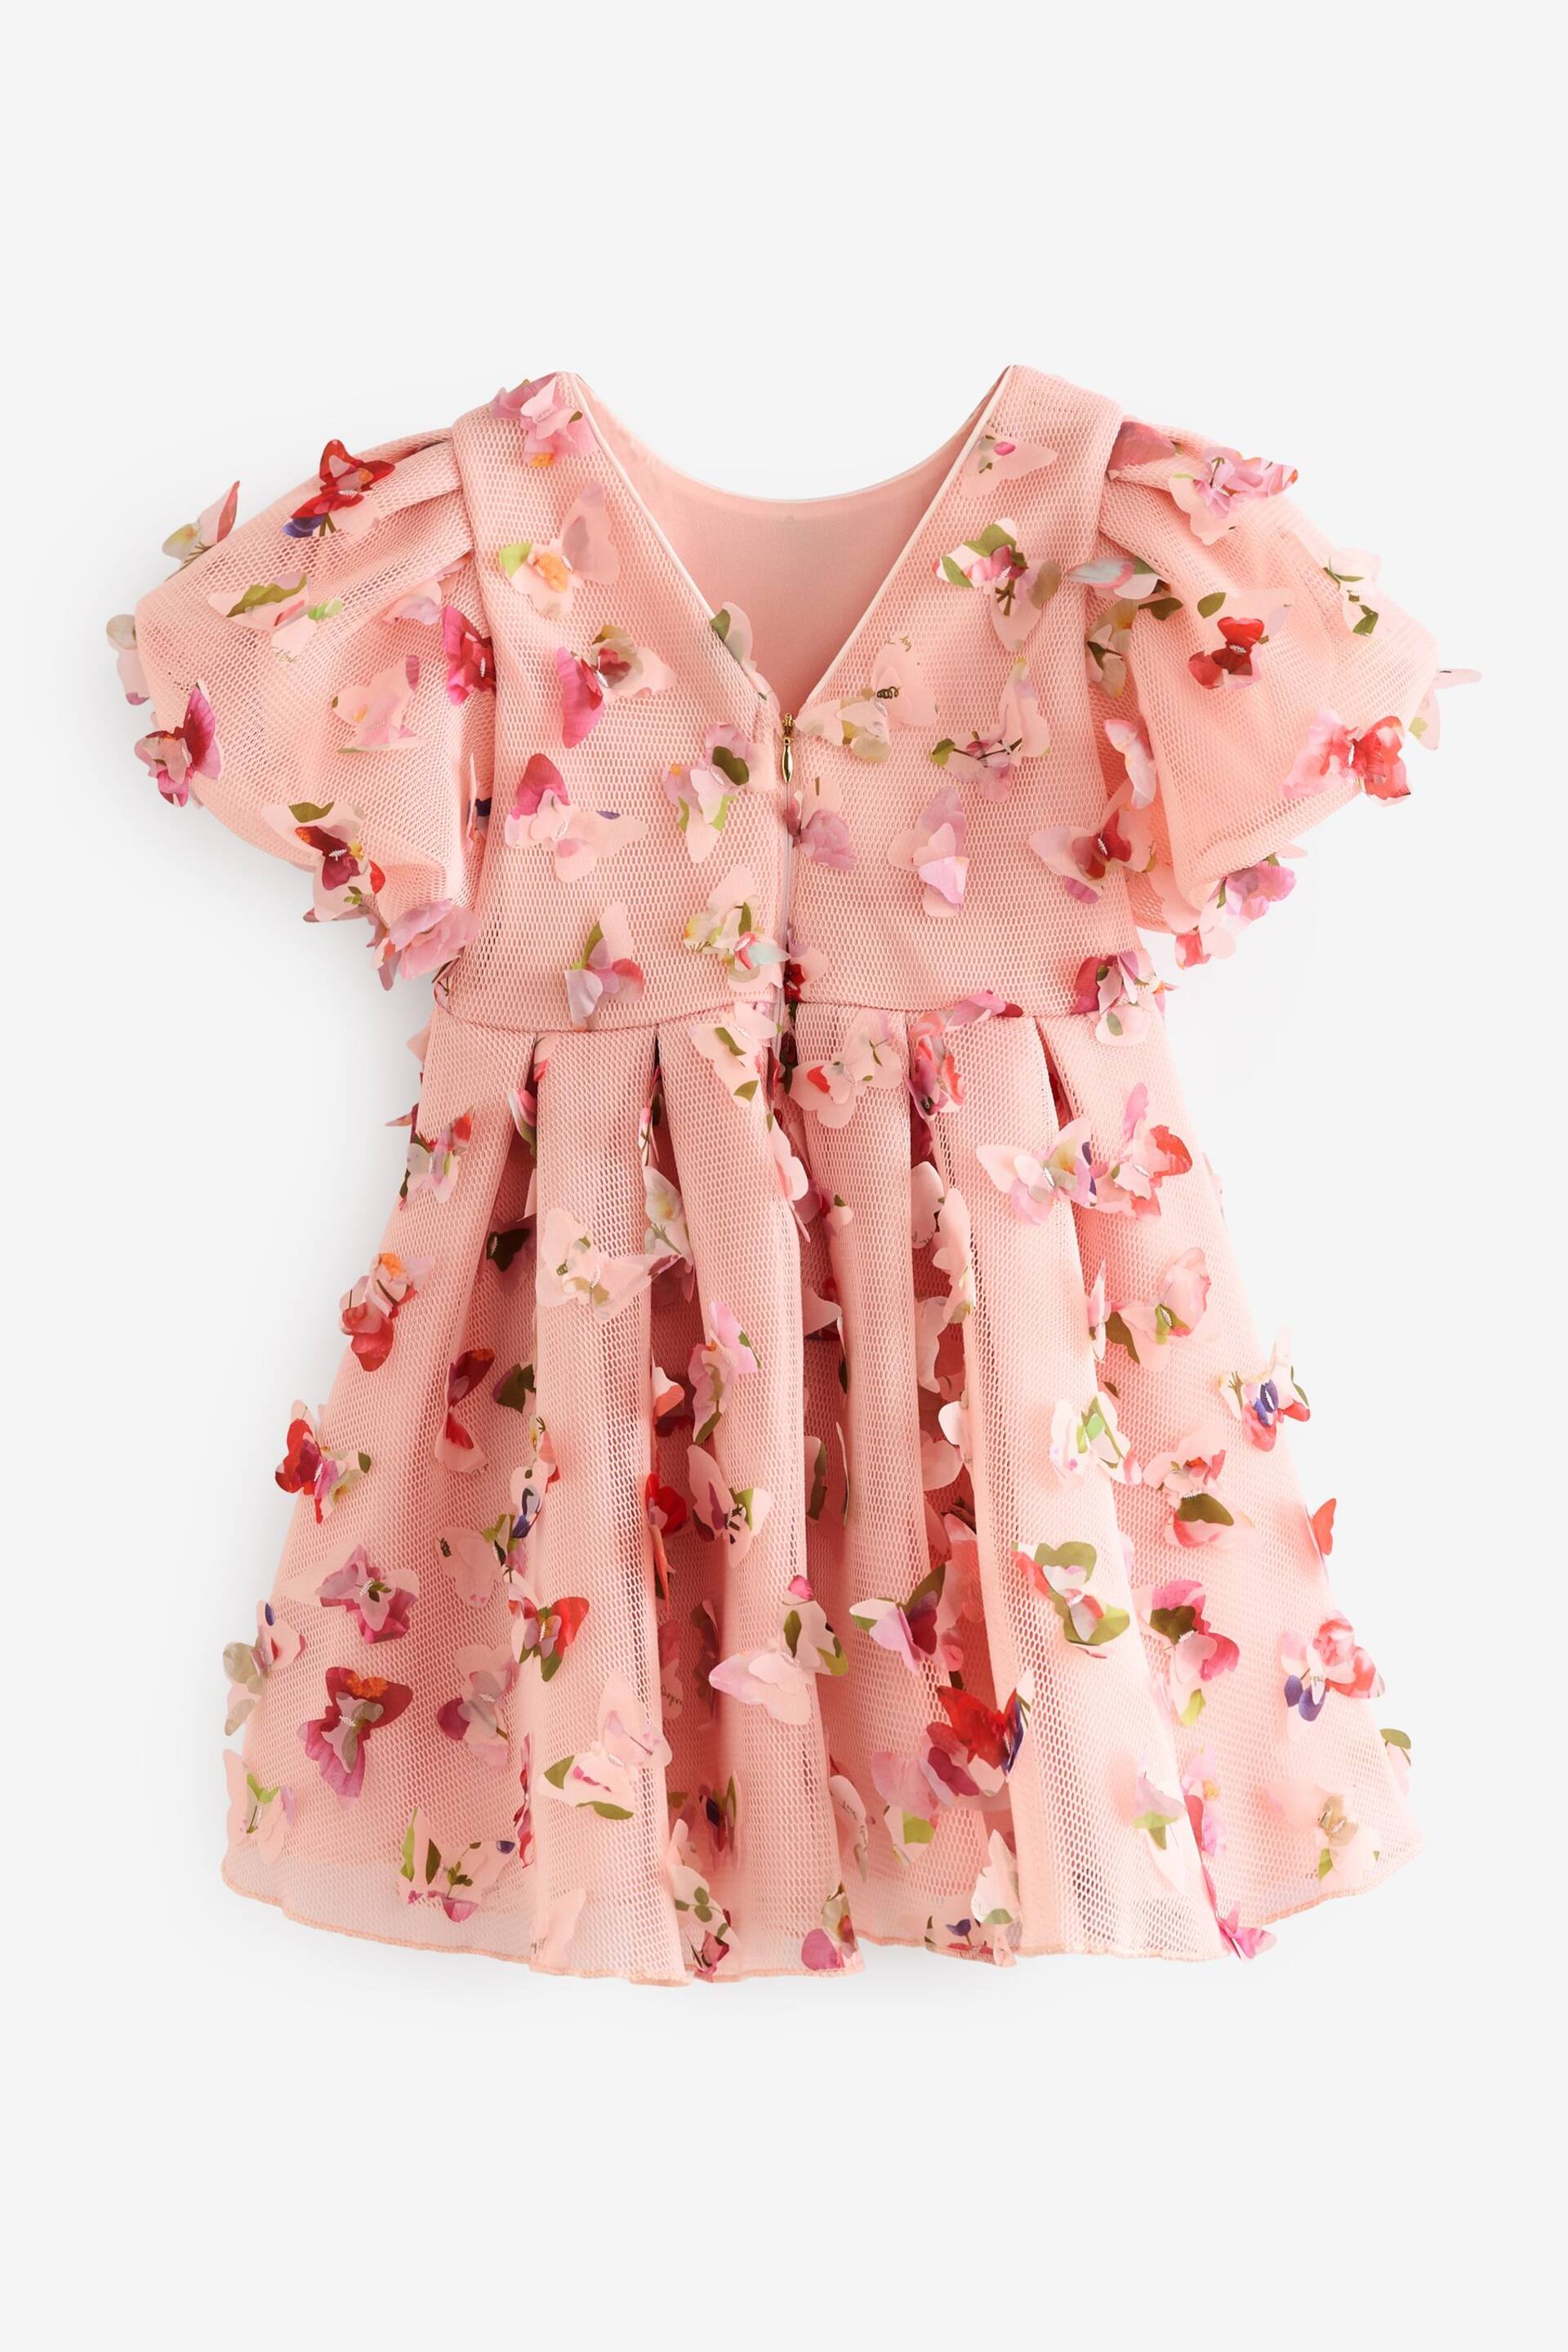 Baker by Ted Baker Pink 3D Butterfly Dress - Image 8 of 10